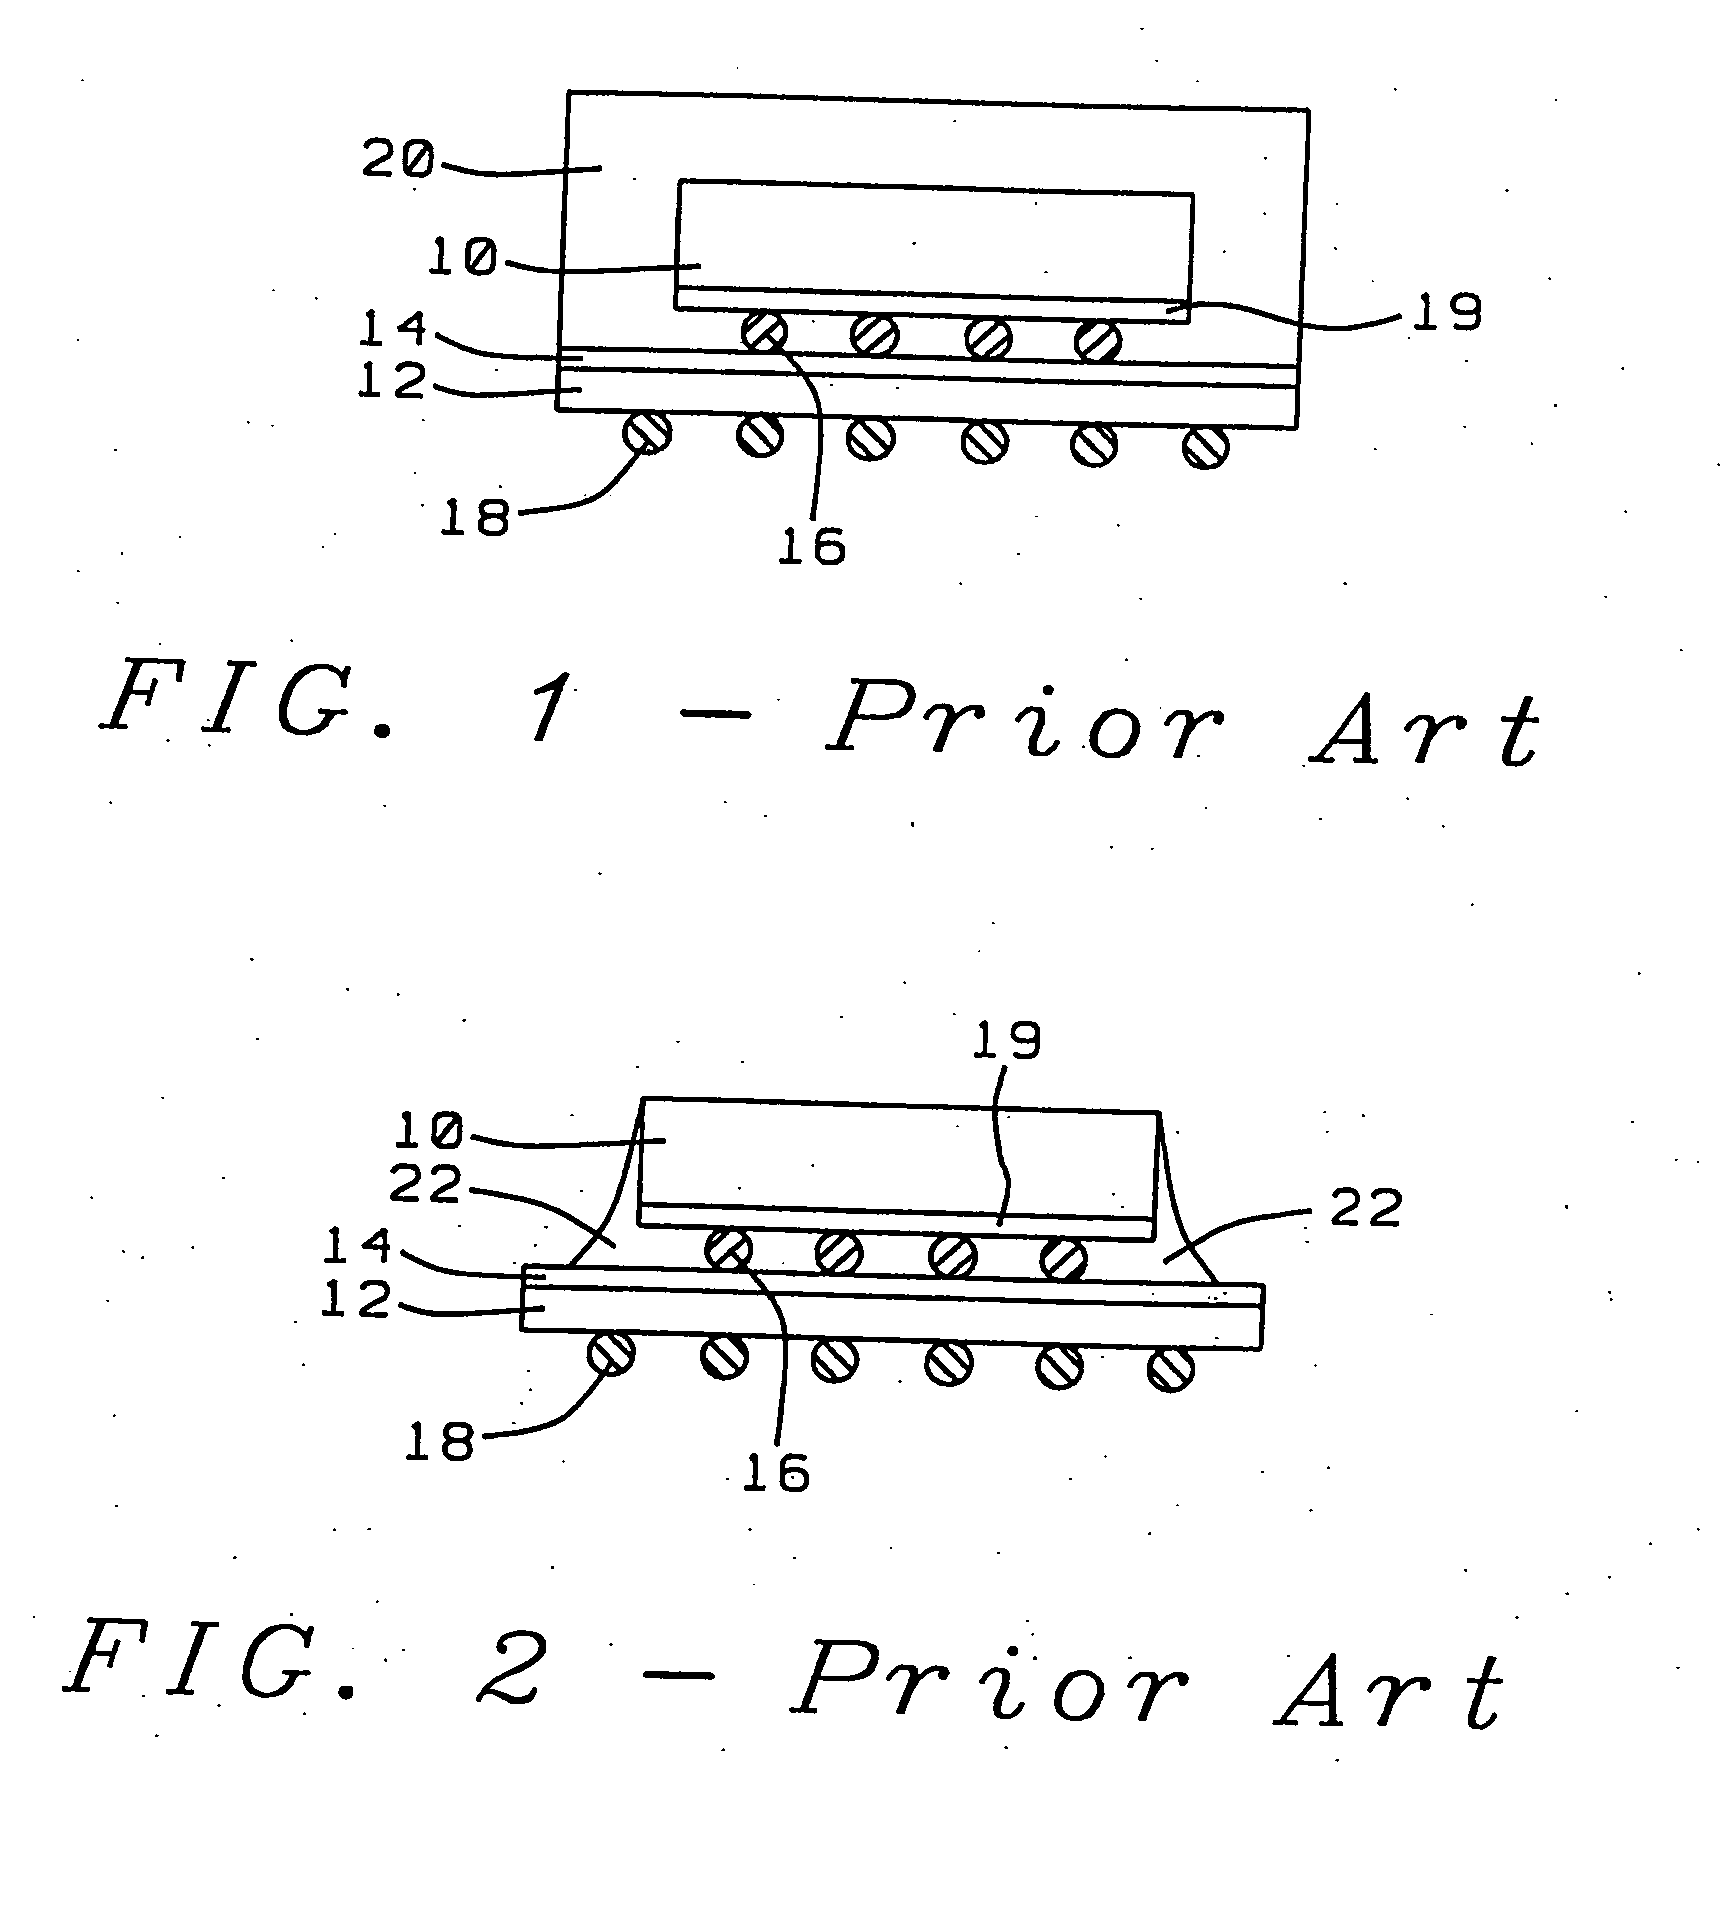 Structure and manufacturing method of a chip scale package